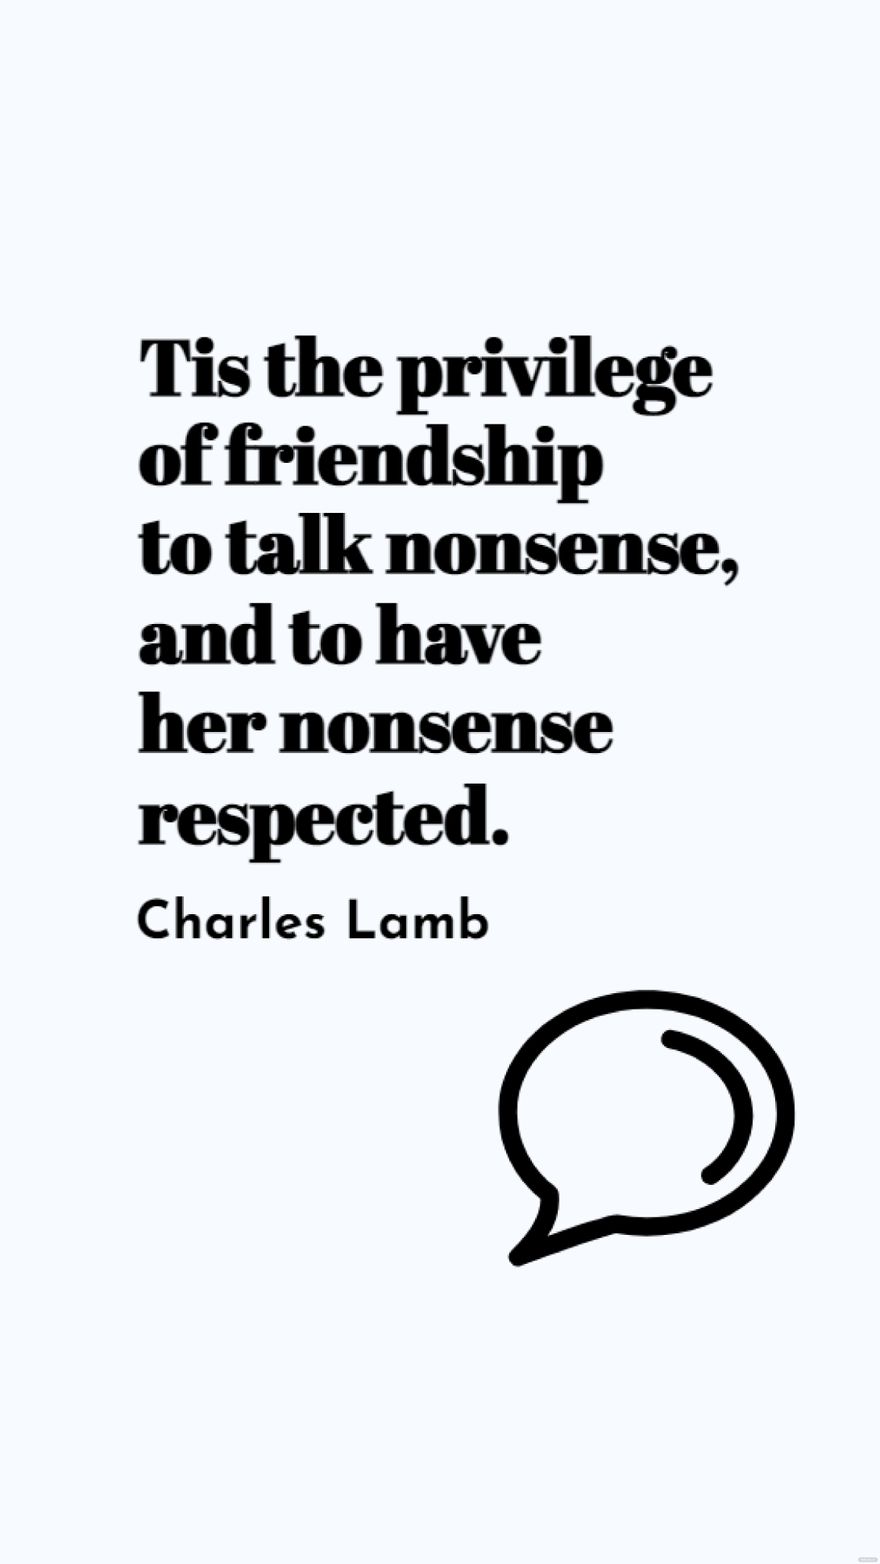 Charles Lamb - Tis the privilege of friendship to talk nonsense, and to have her nonsense respected.